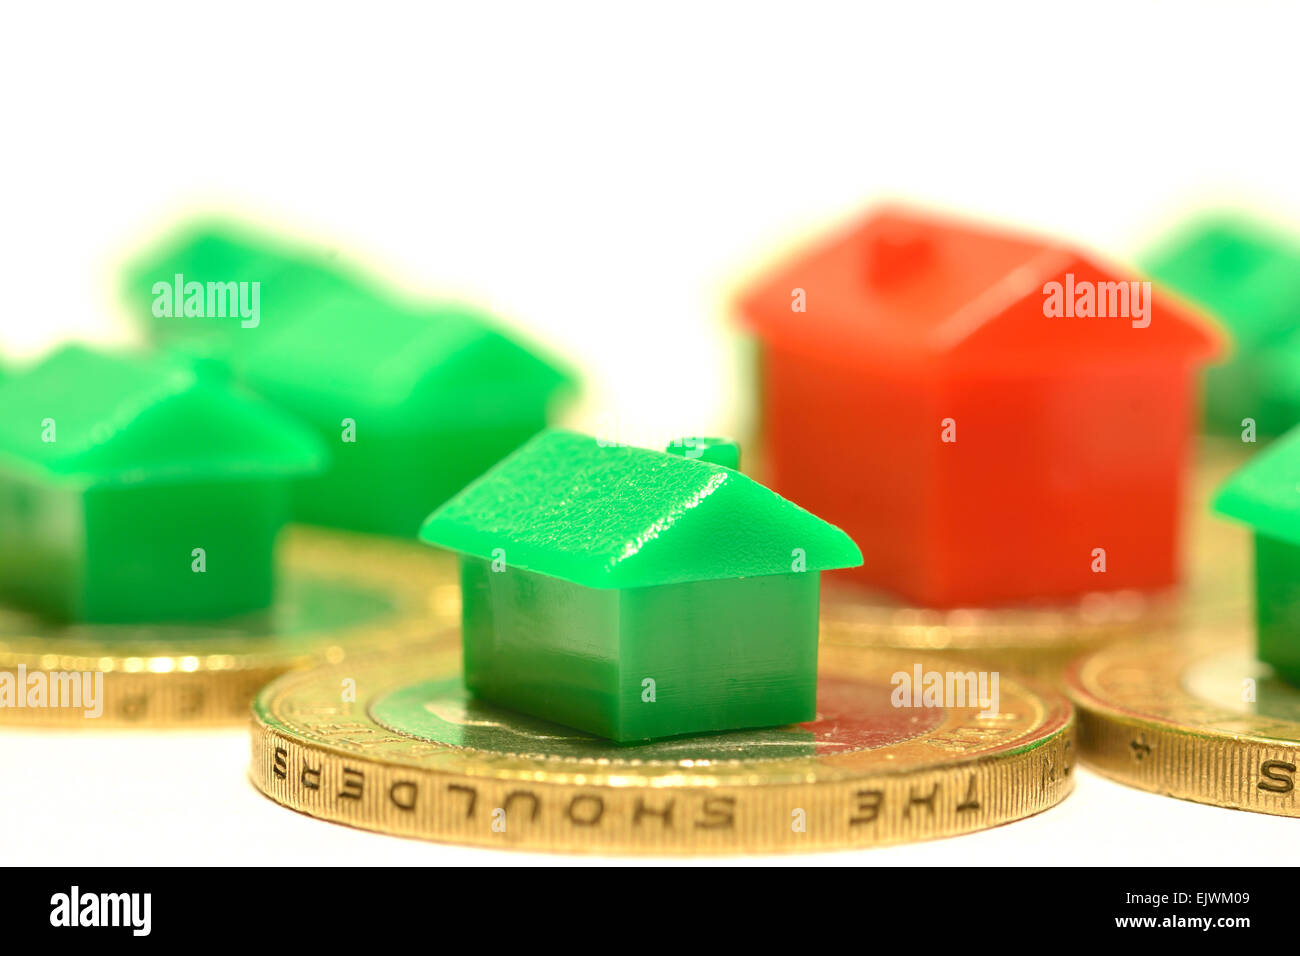 monopoly houses & hotel on coins, Property Market House buying concept Stock Photo